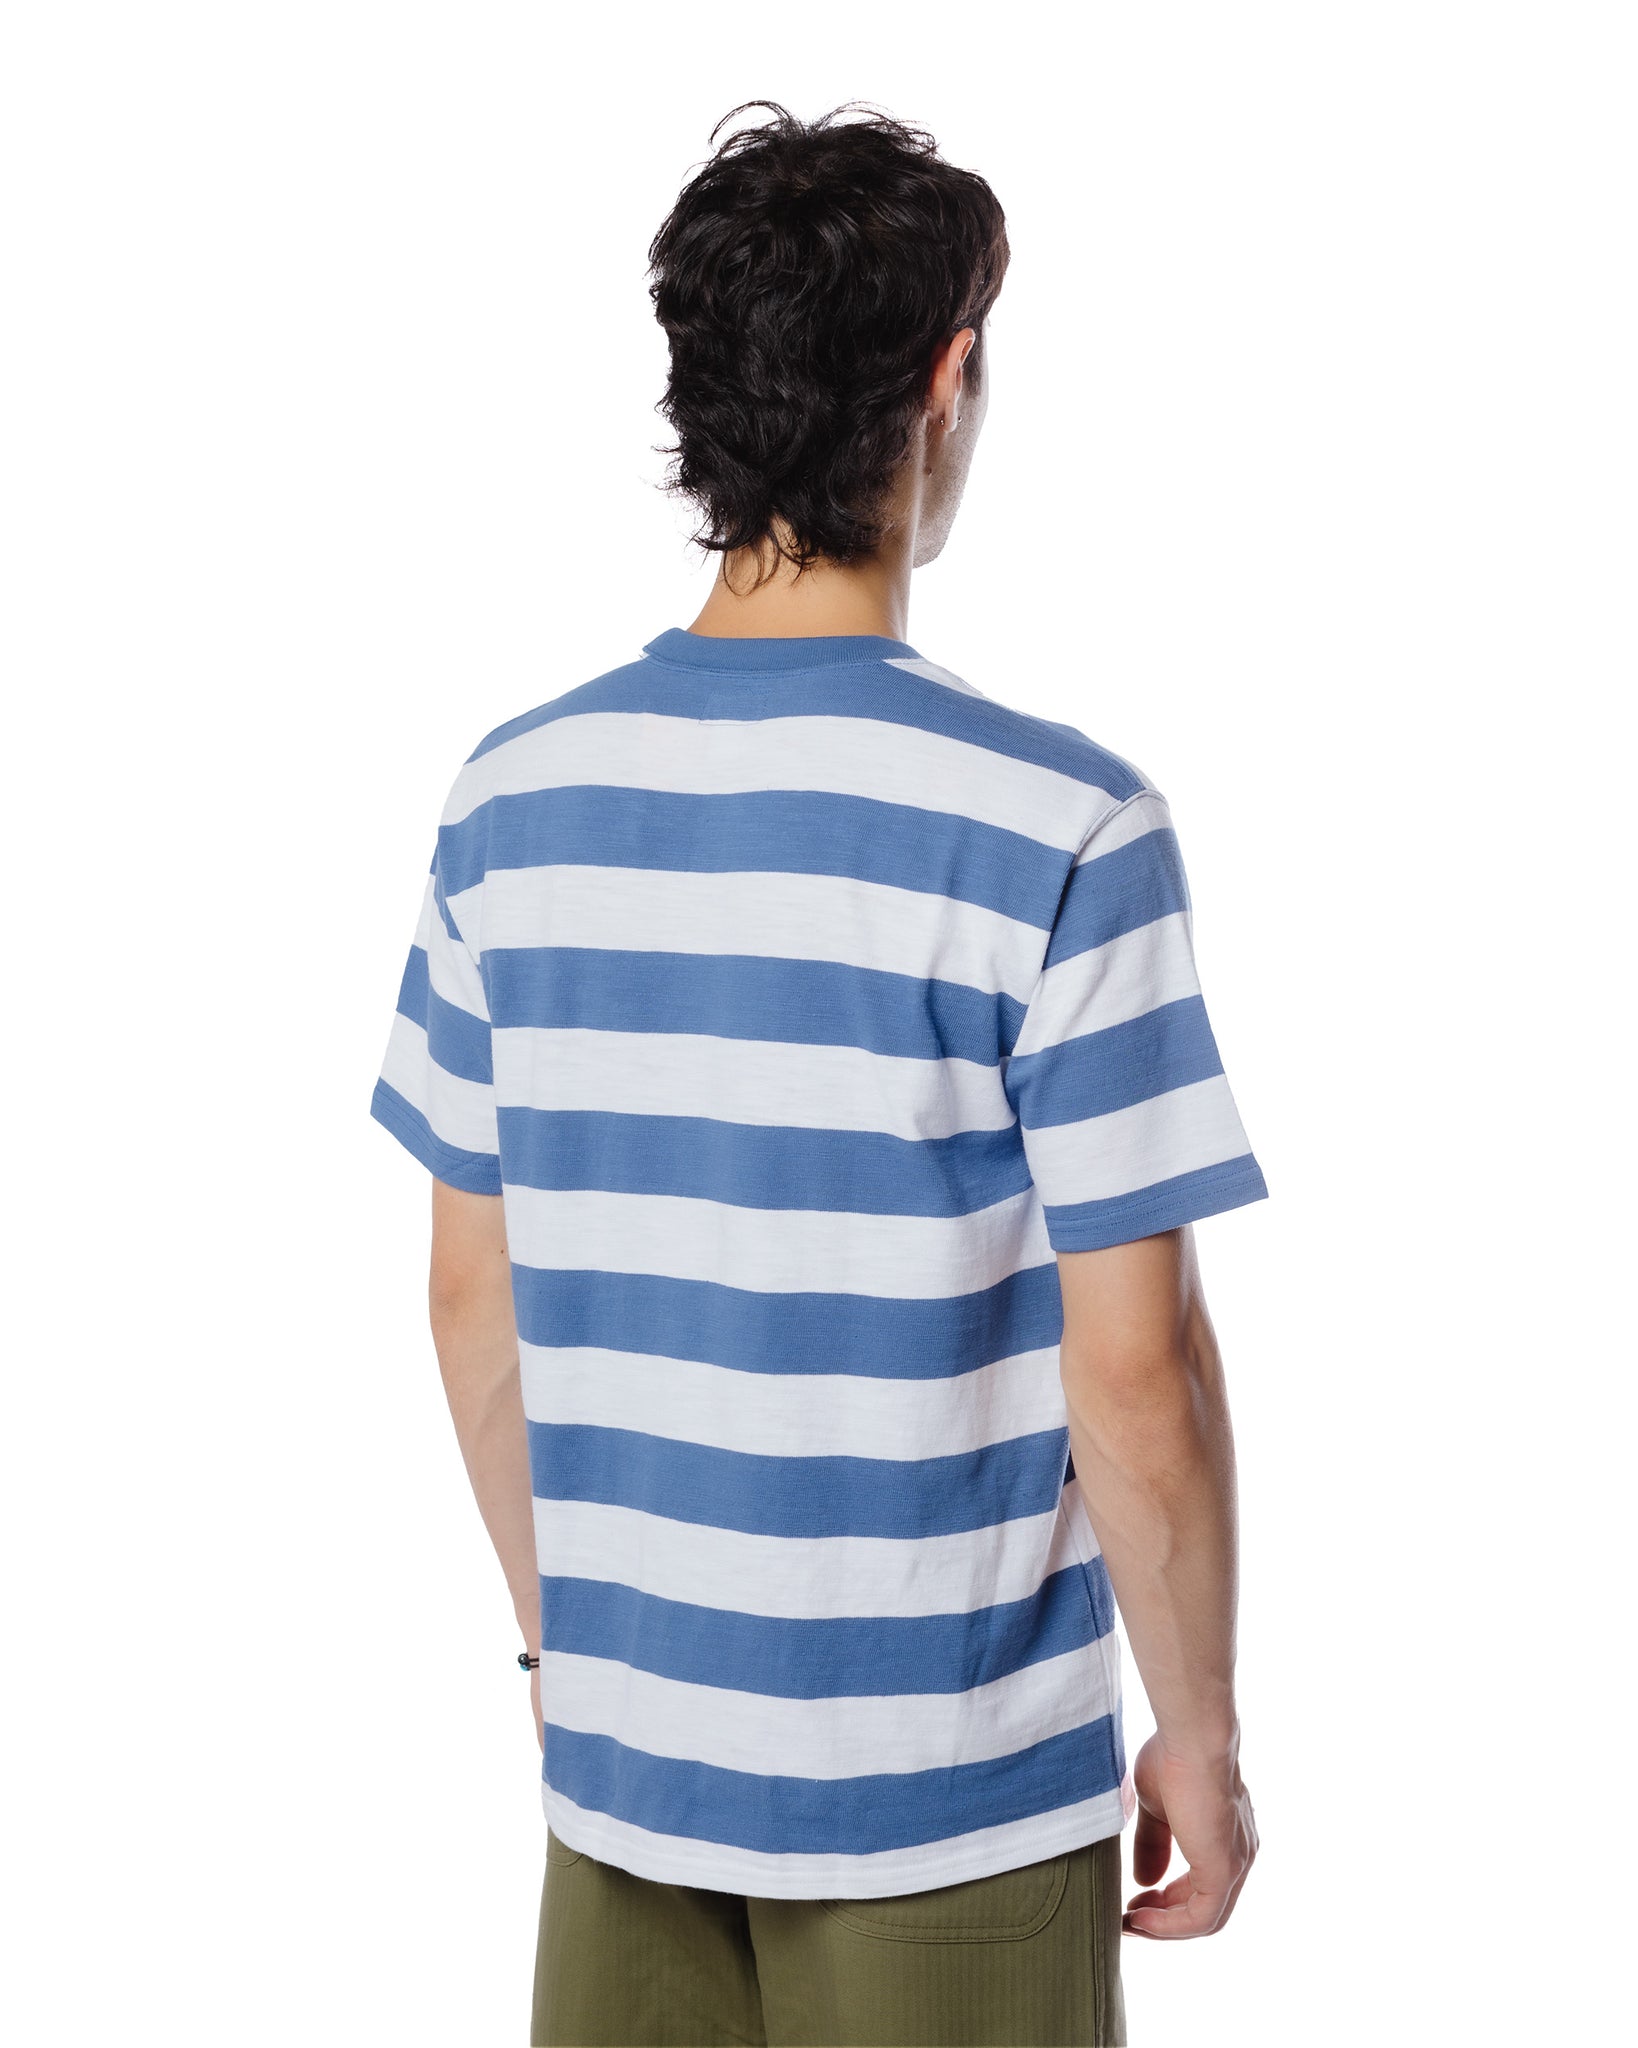 The Real McCoy's BC20007 Buco Stripe Tee S/S White/Blue Model Rear